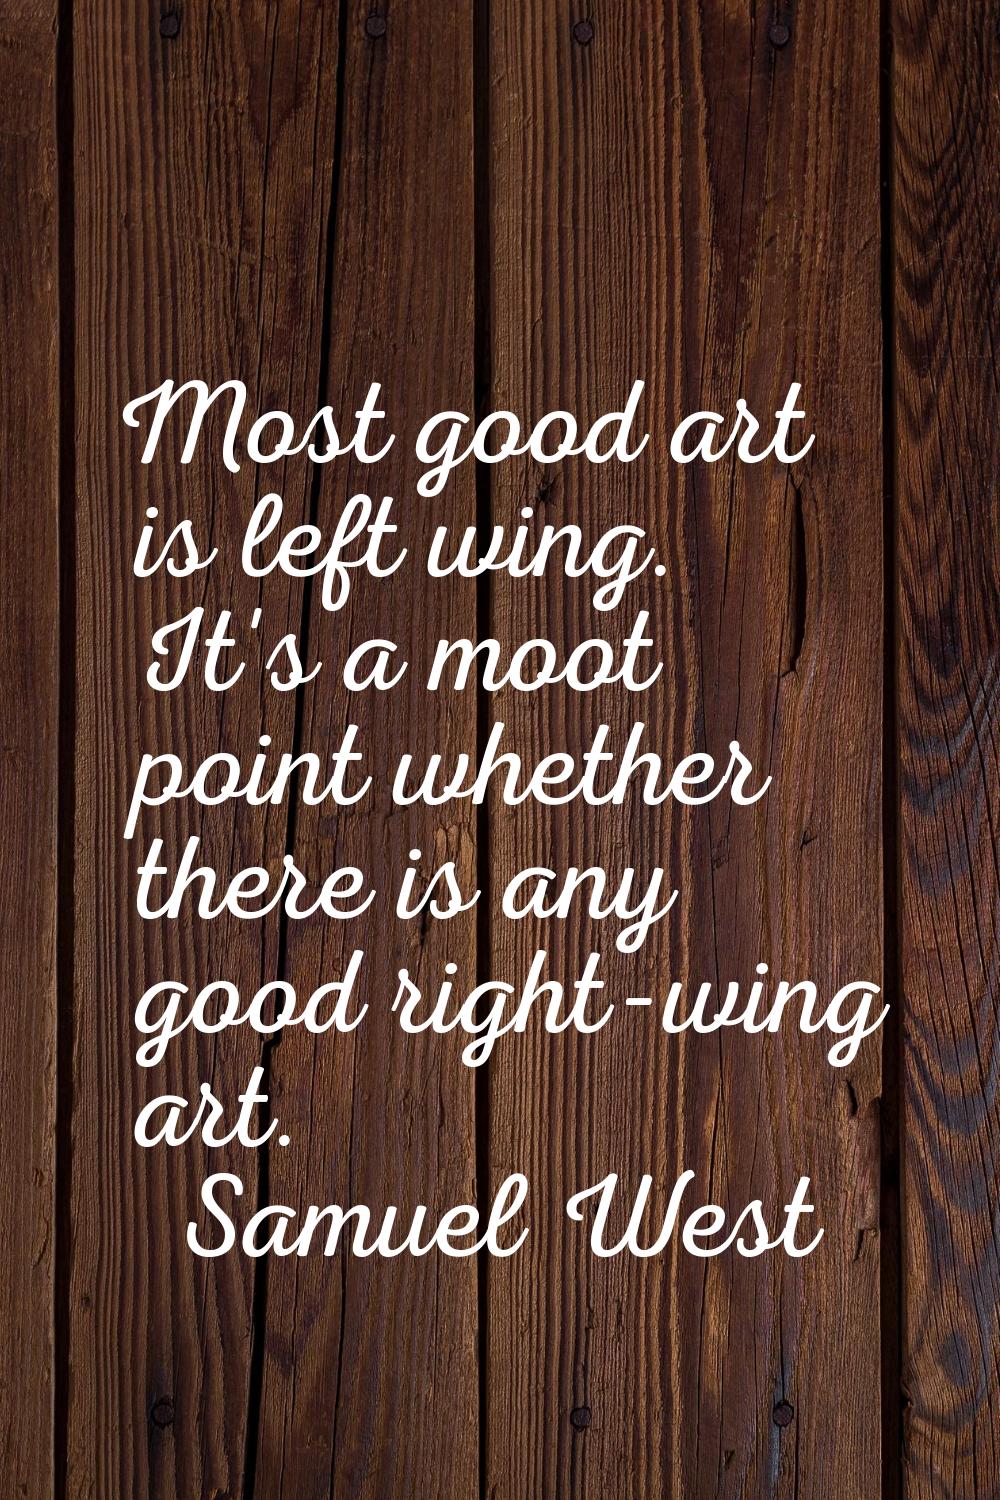 Most good art is left wing. It's a moot point whether there is any good right-wing art.